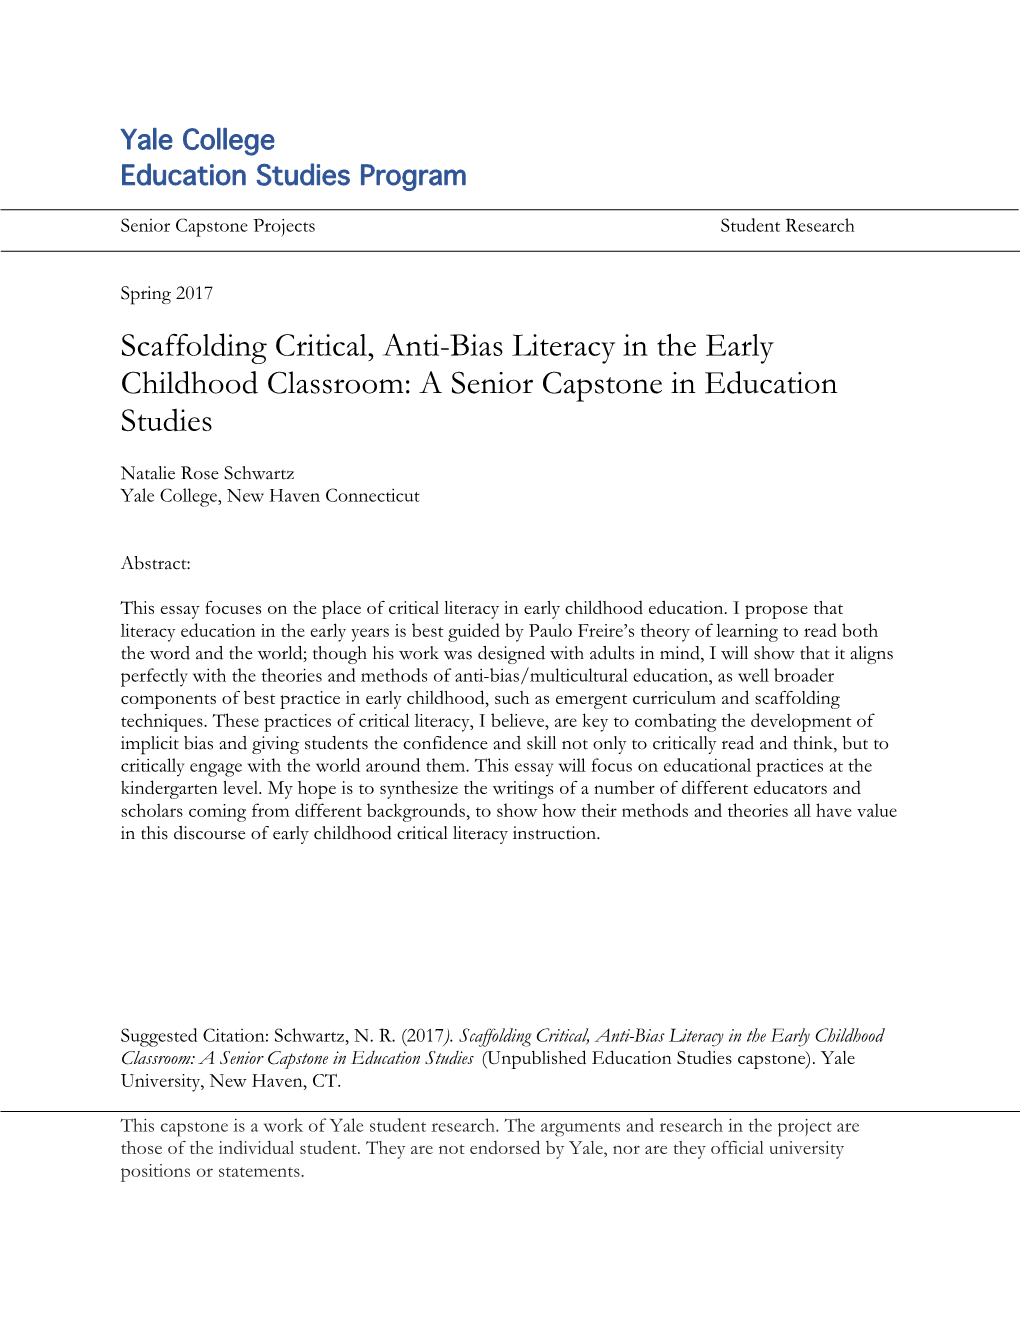 Scaffolding Critical, Anti-Bias Literacy in the Early Childhood Classroom: a Senior Capstone in Education Studies